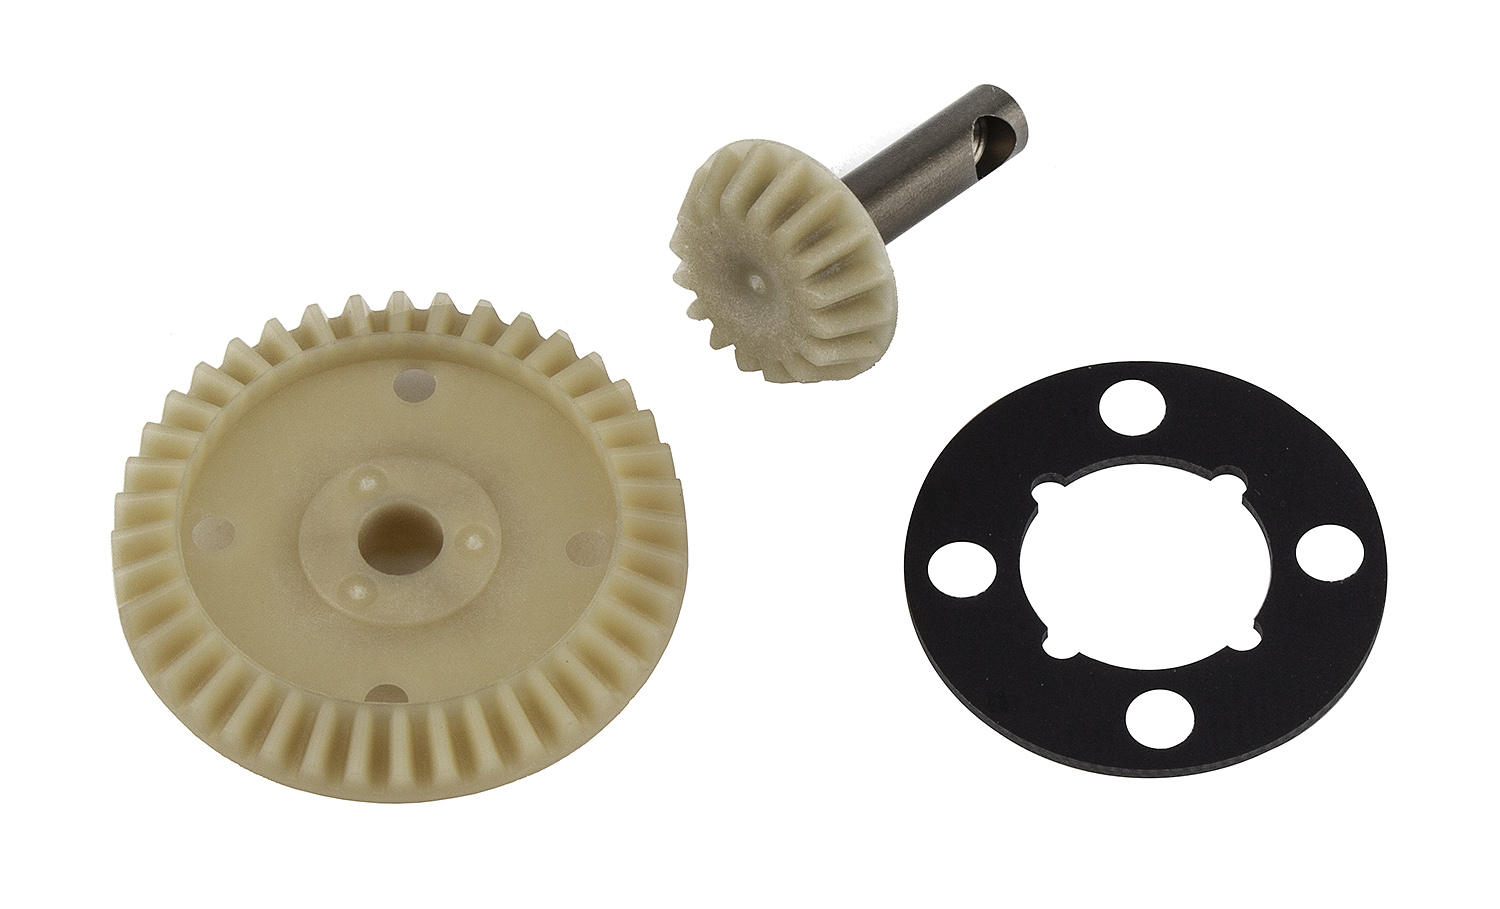 Ring and Pinion Gear Sets